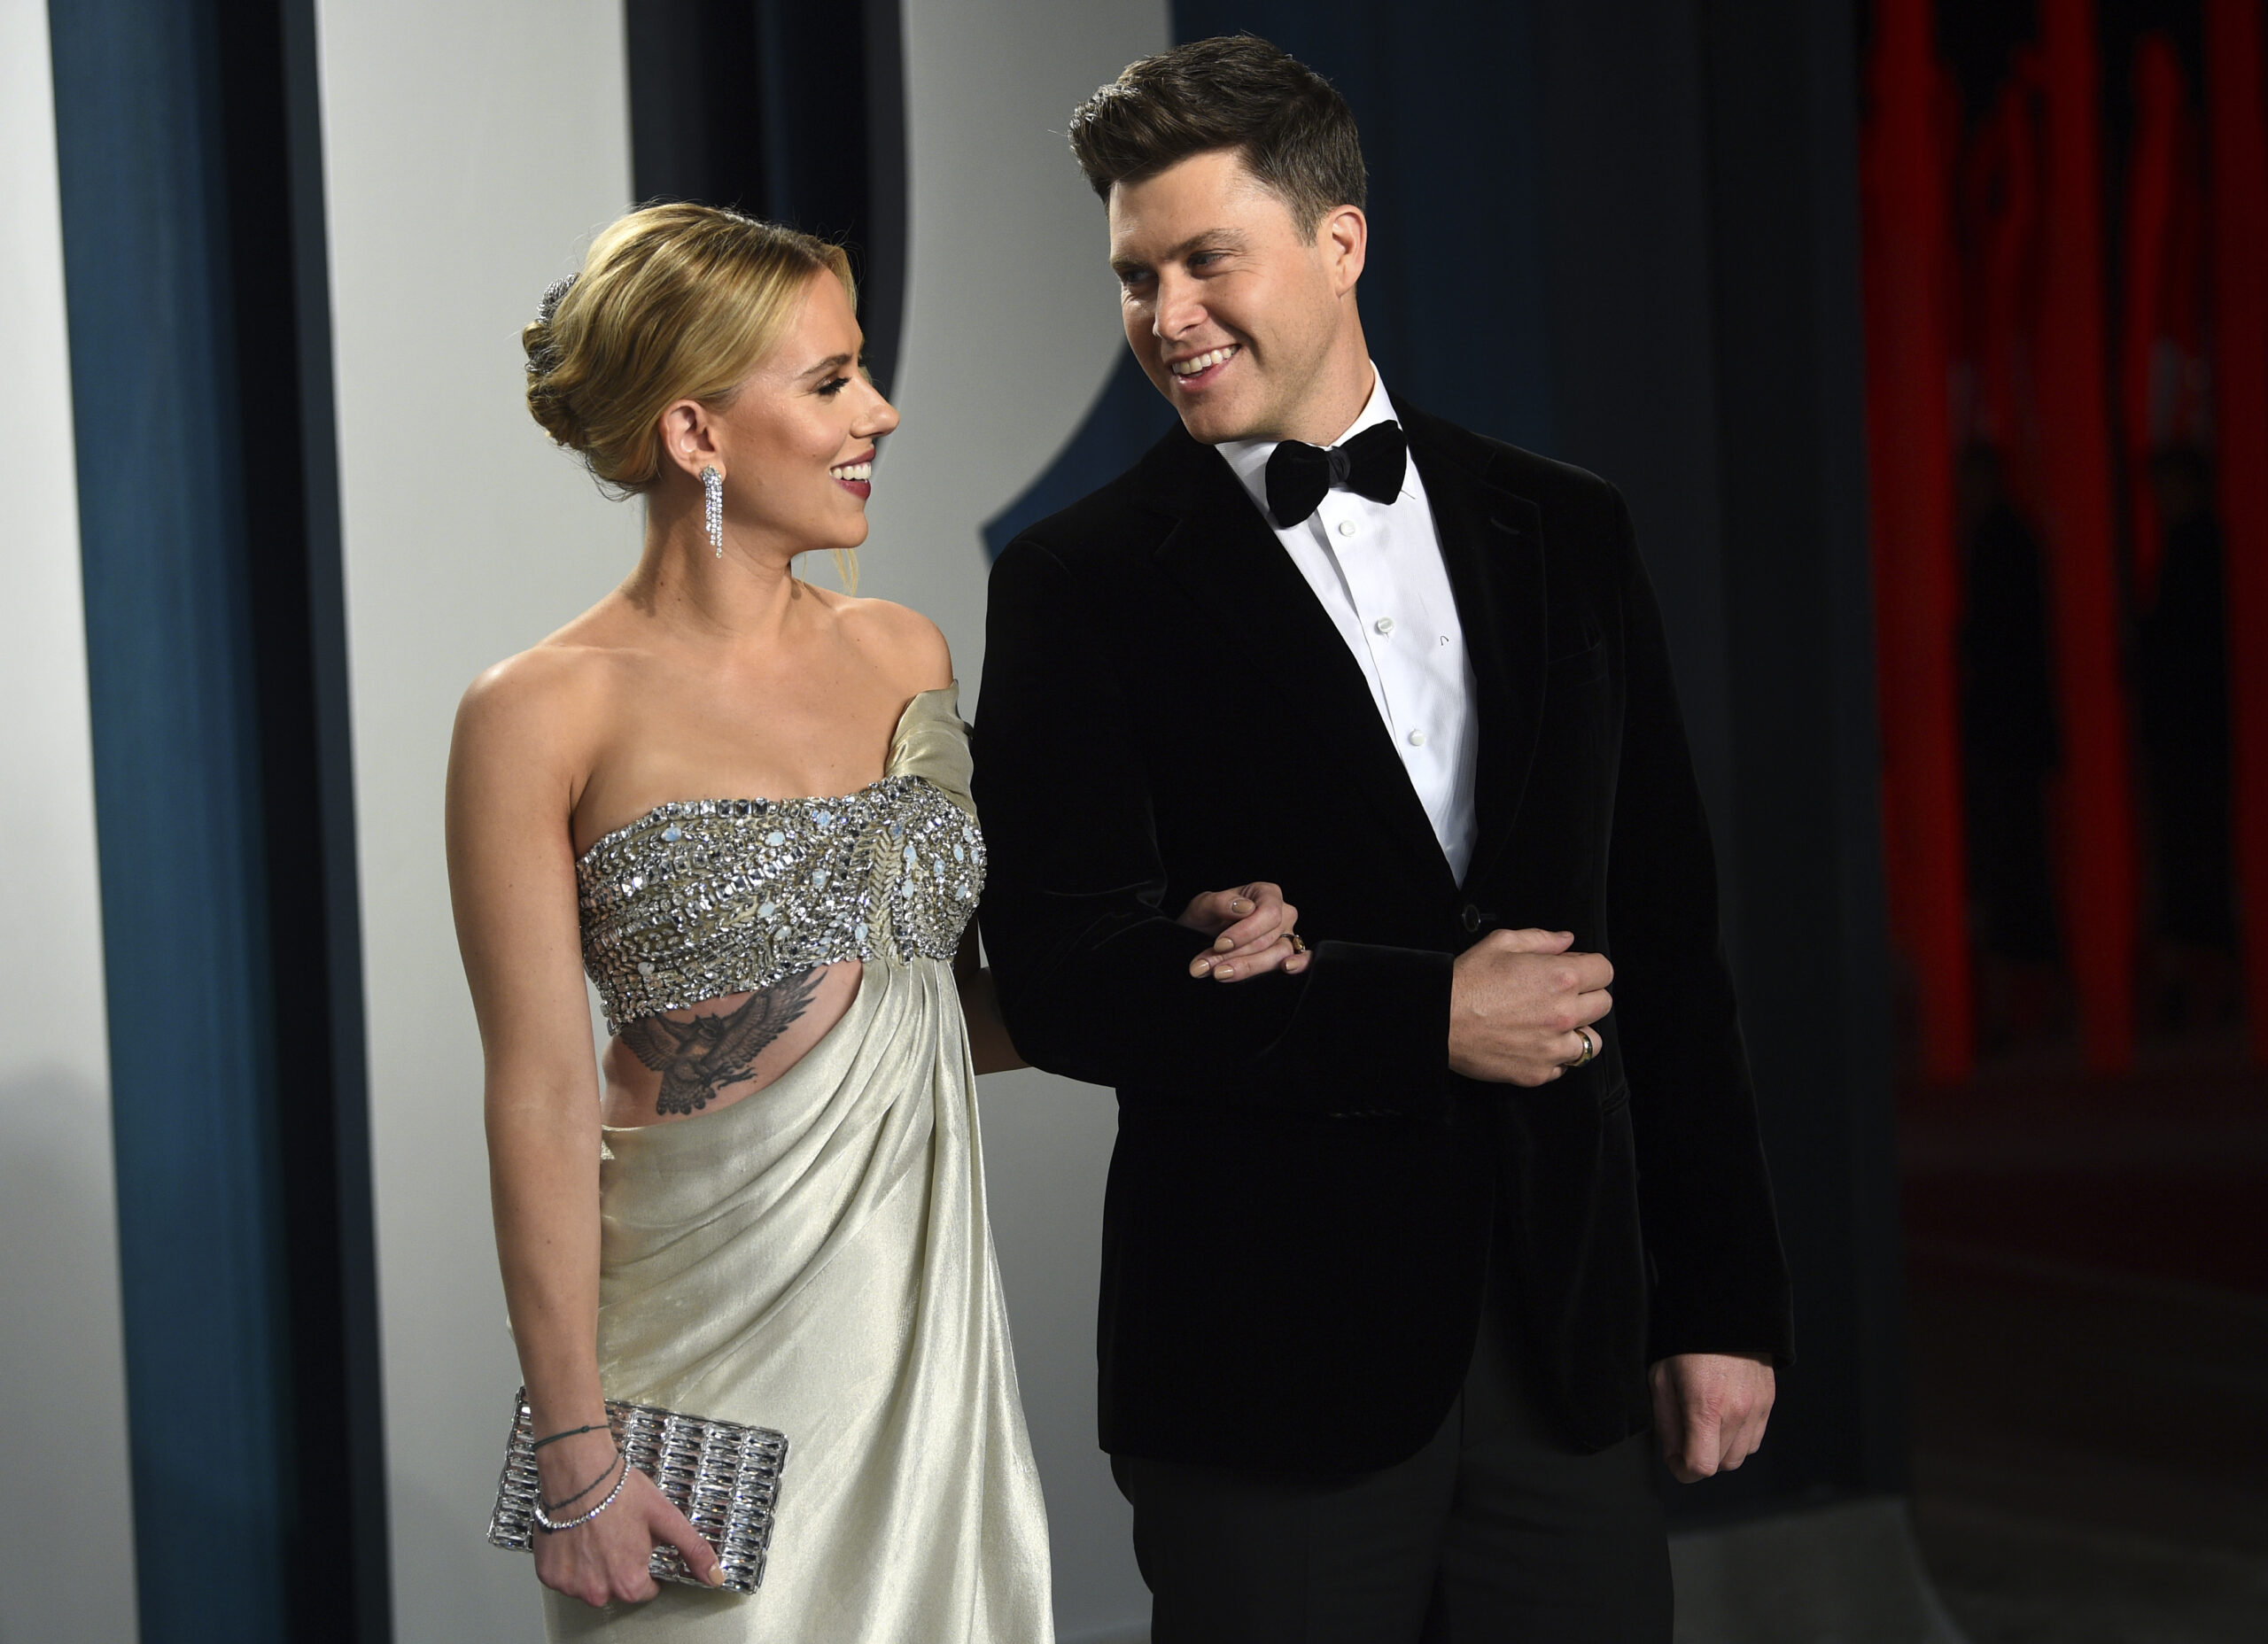 FILE - In this Feb. 9, 2020 file photo, Scarlett Johansson, left, and Colin Jost arrive at the Vanity Fair Oscar Party in Beverly Hills, Calif. Meals on Wheels America announced Thursday on Instagram that Johansson and Jost married over the weekend in an intimate ceremony. (Photo by Evan Agostini/Invision/AP, FIle)